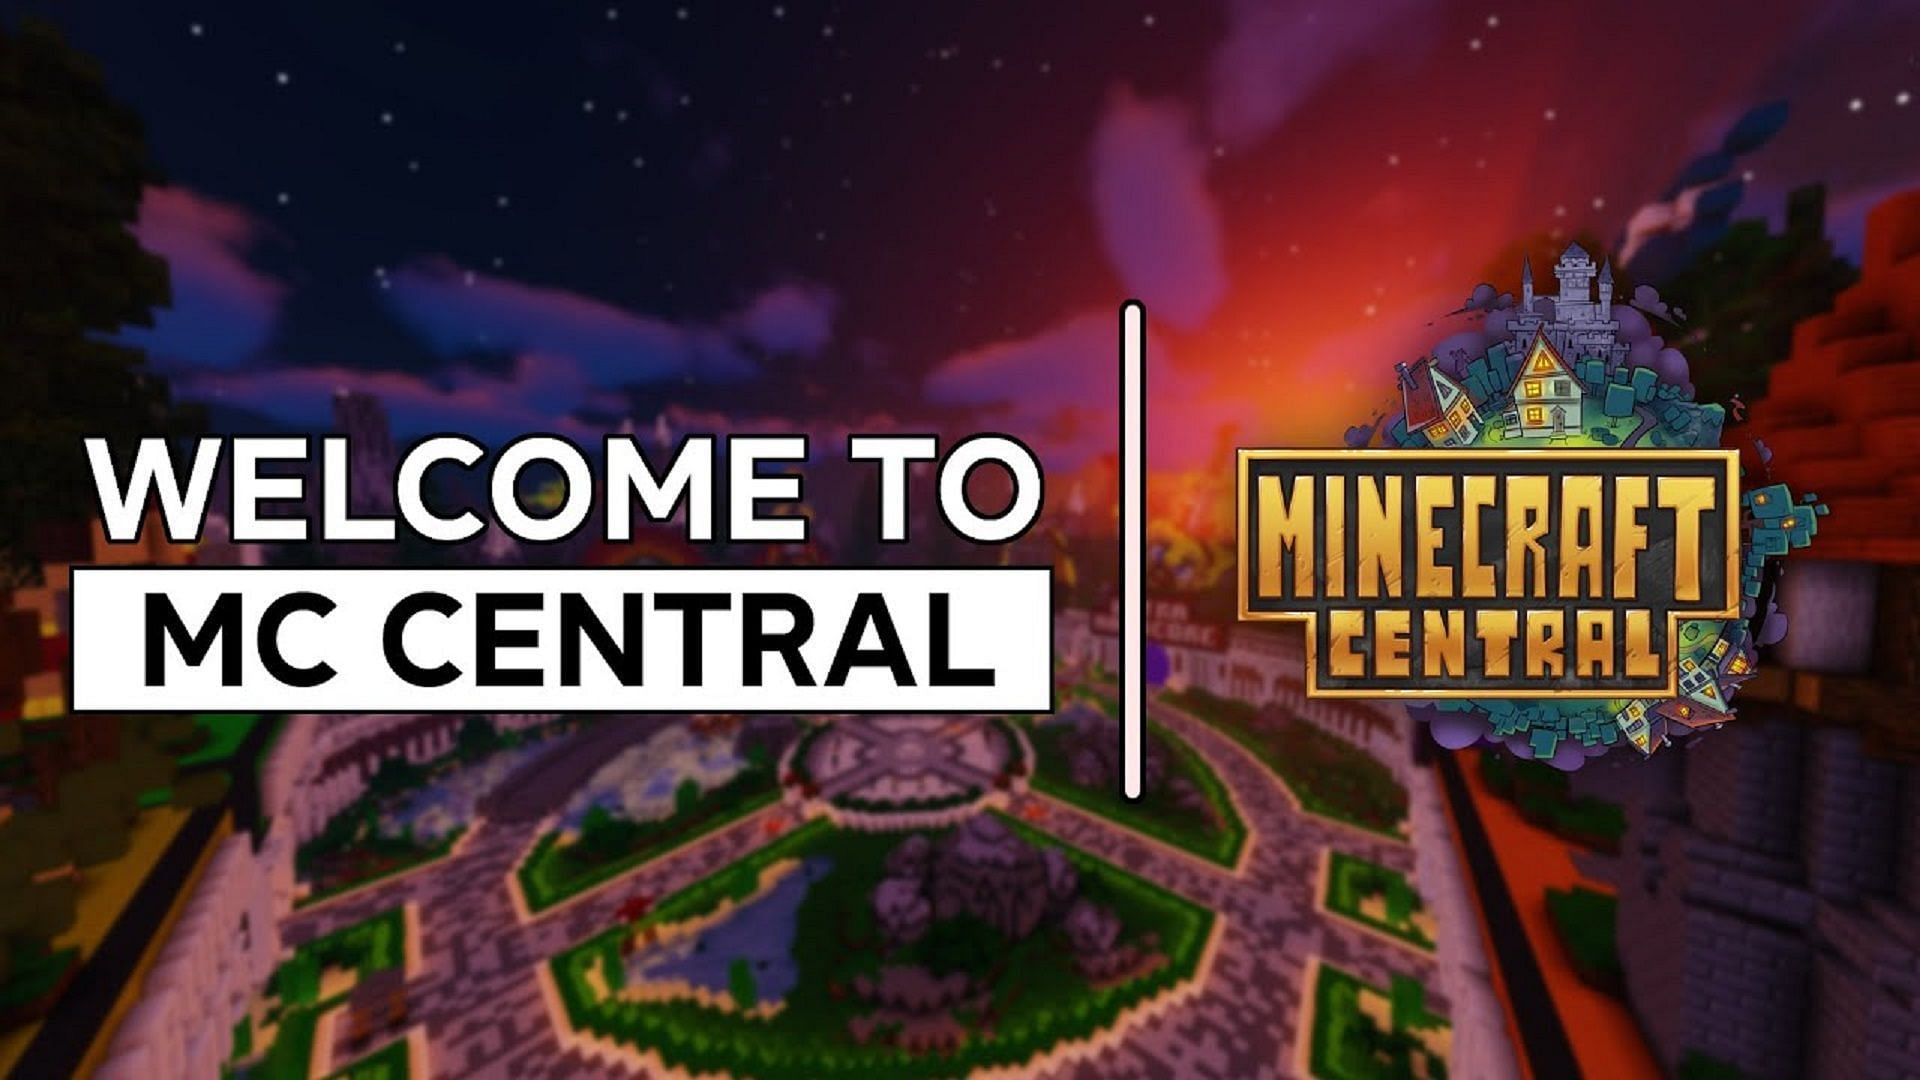 MC Central has remained one of the highest rated Minecraft servers in the community (Image via MC Central)